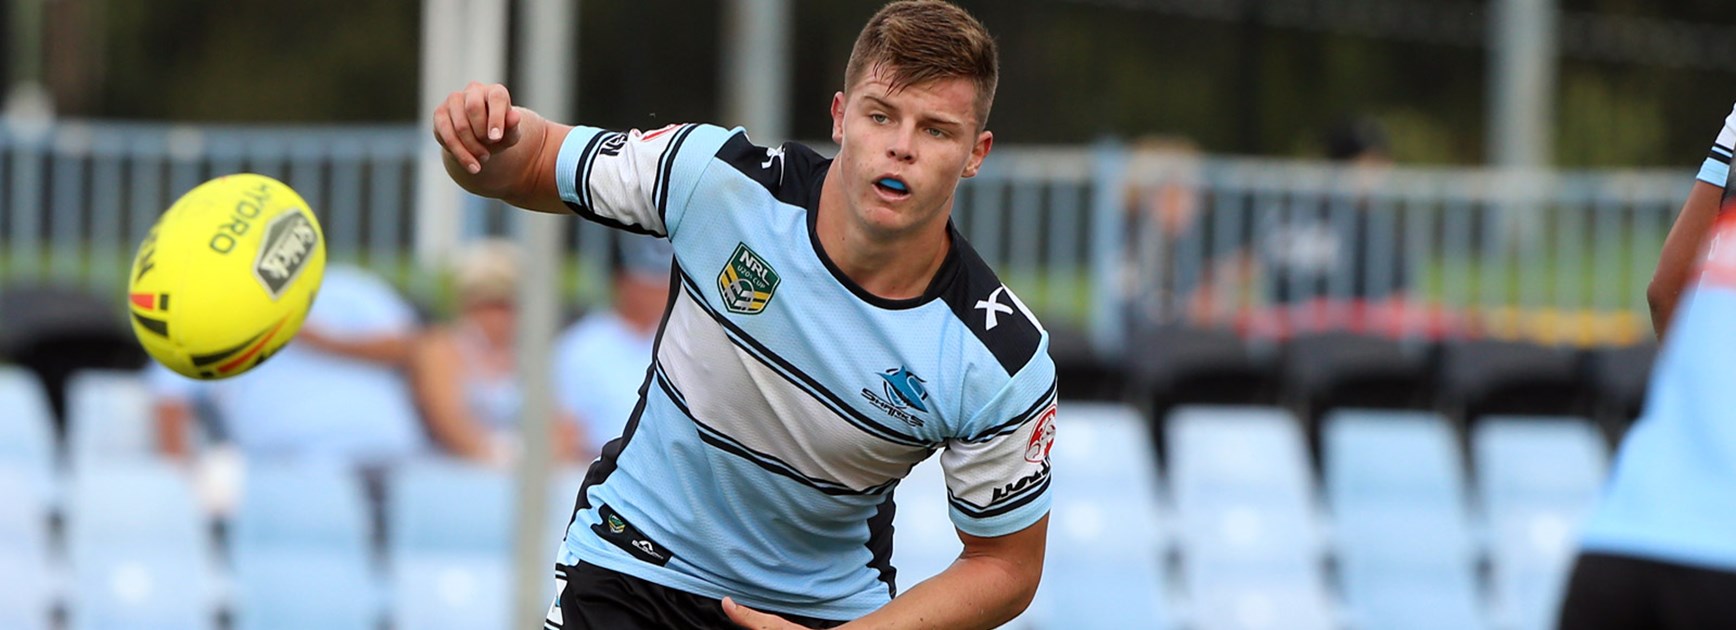 Cronulla's NYC side recorded one of the more remarkable victories in NYC history in Round 4.